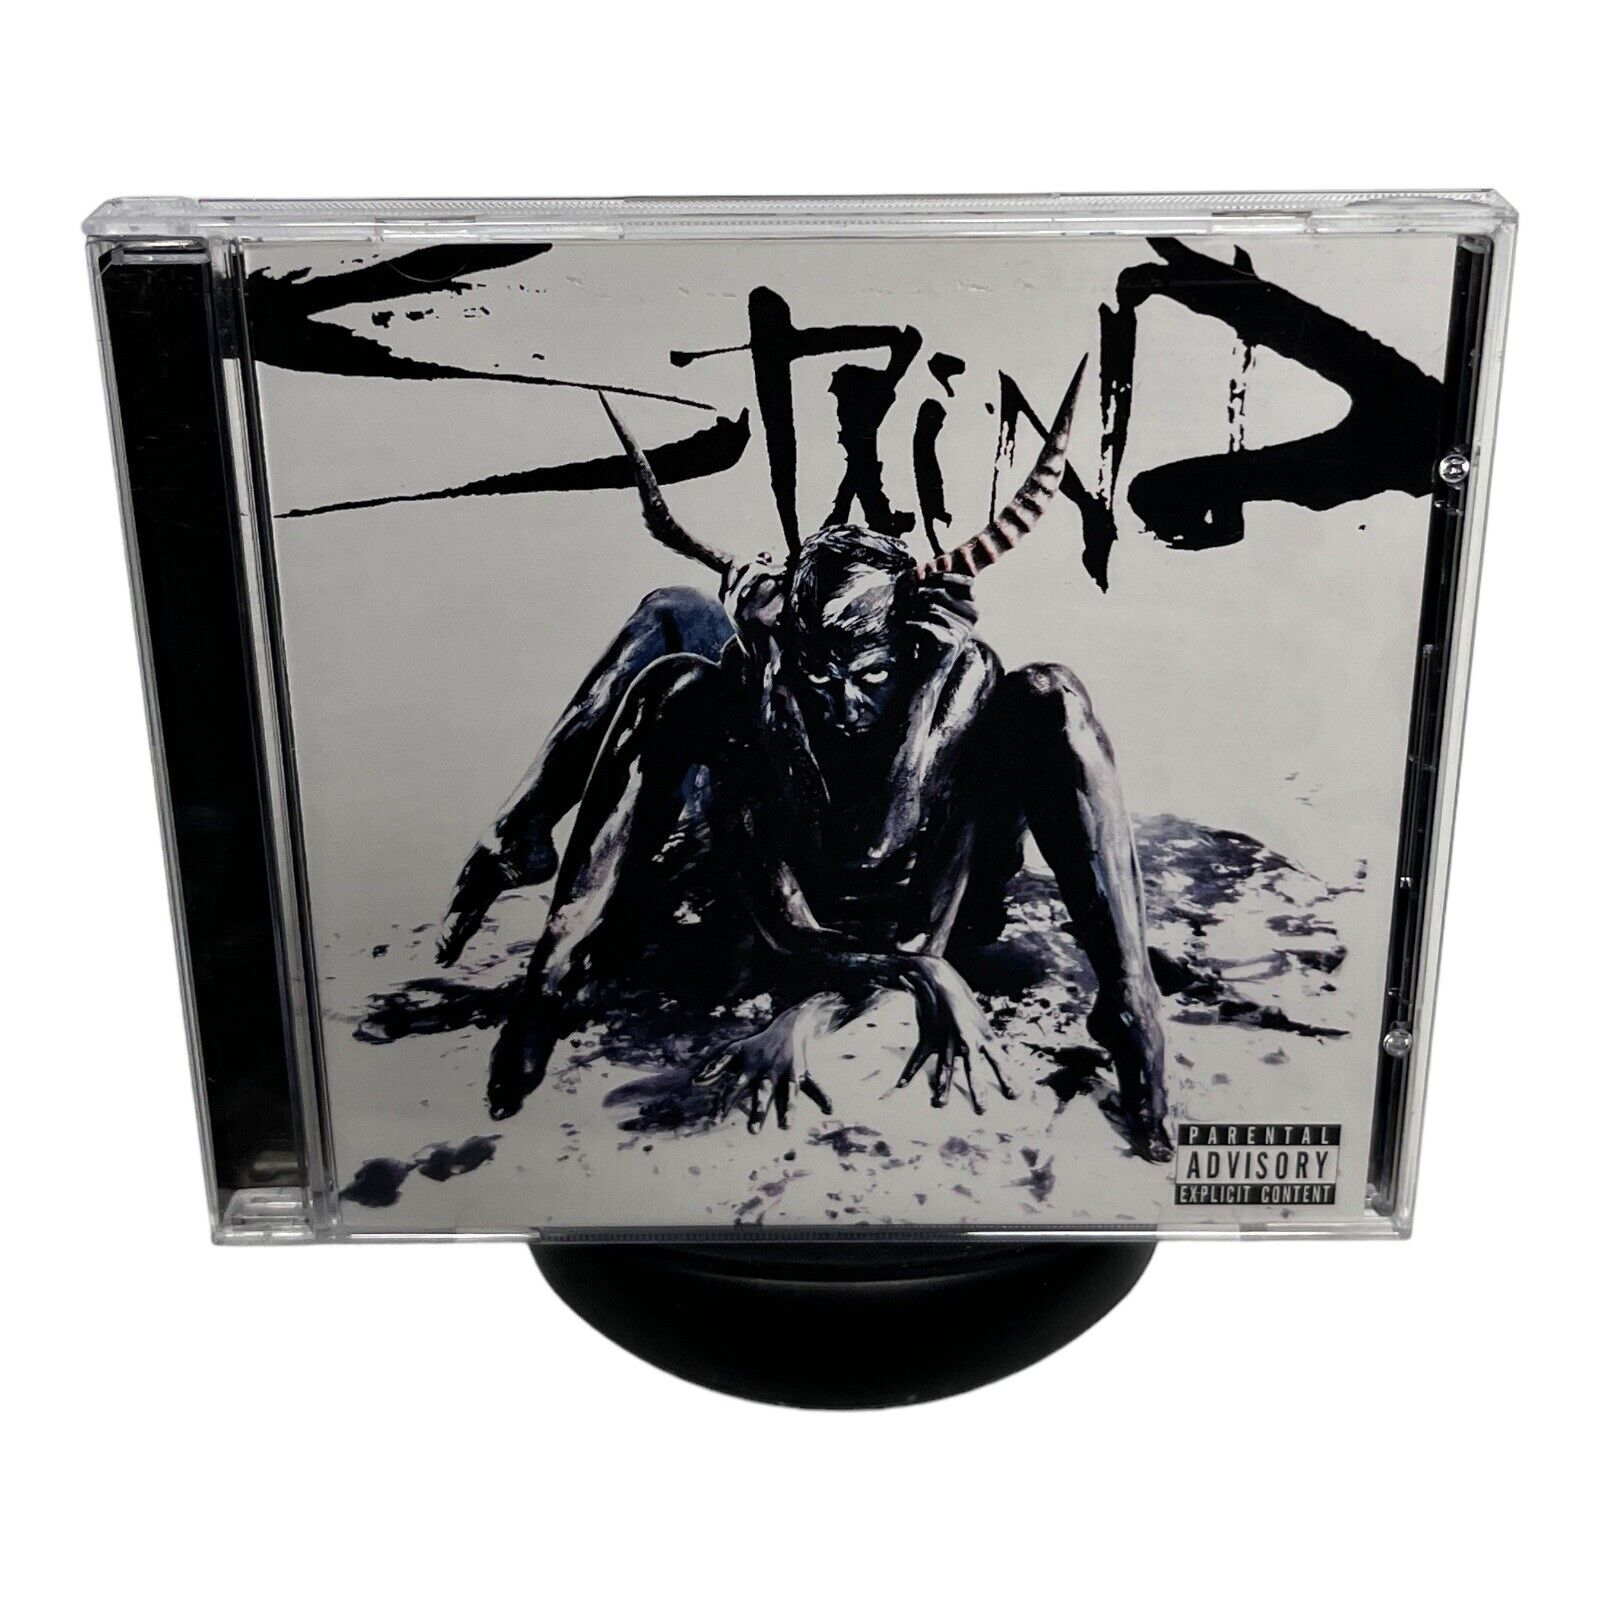 Staind- RARE- Self Titled (CD, 2011) Atlantic Records- 10 tracks - OOP